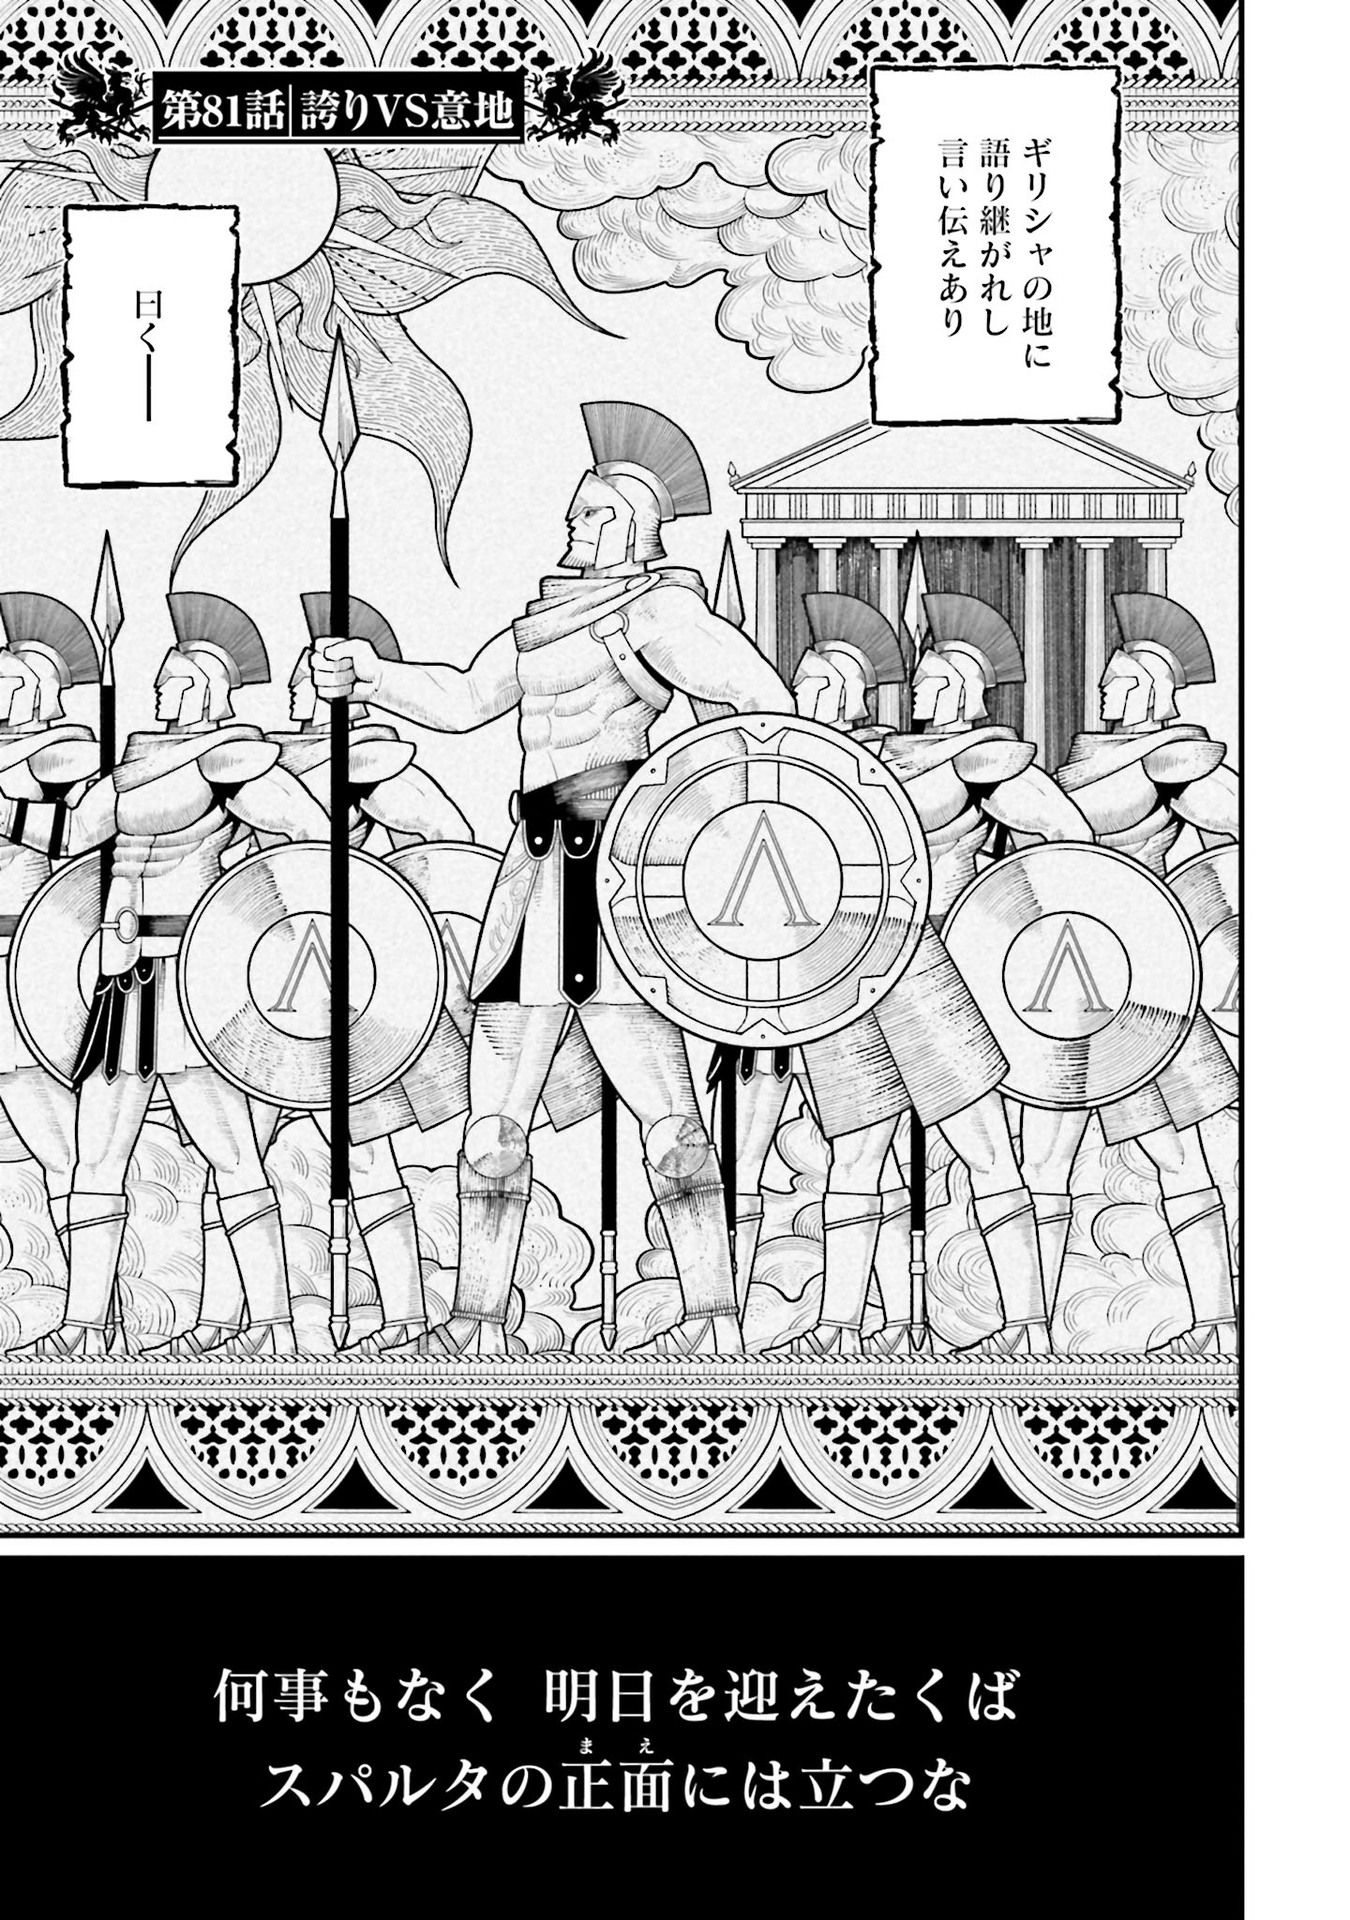 Spoilers for Record of Ragnarok chapter 81 Team Humanity is rejoicing